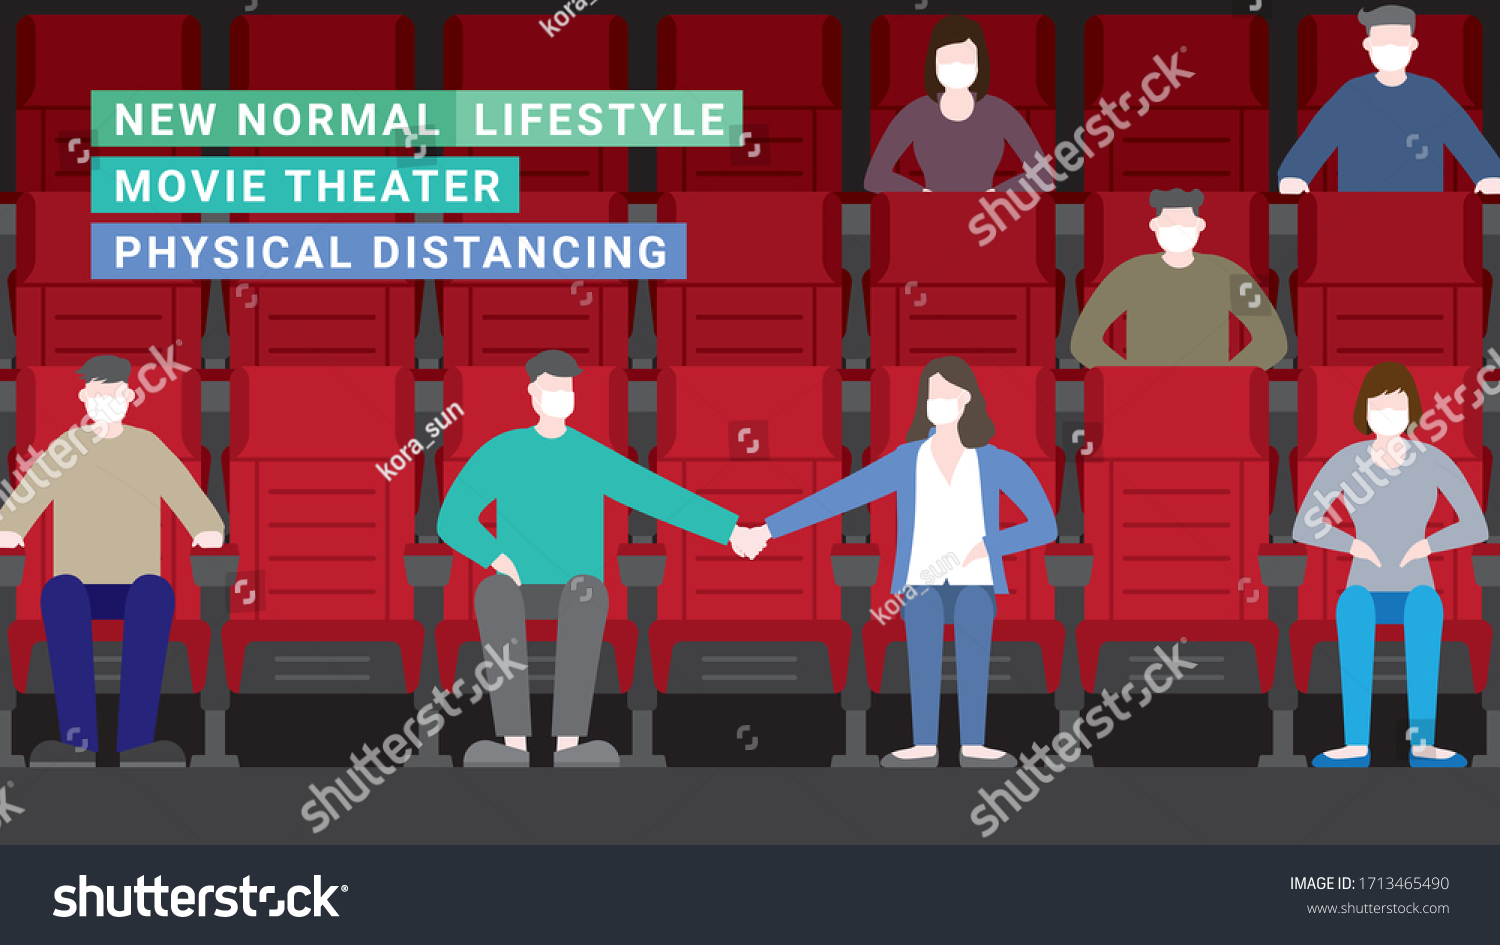 SVG of Couple in movie theater lifestyle after pandemic covid-19 corona virus. New normal is social distancing and wearing mask. Flat design style vector concept svg